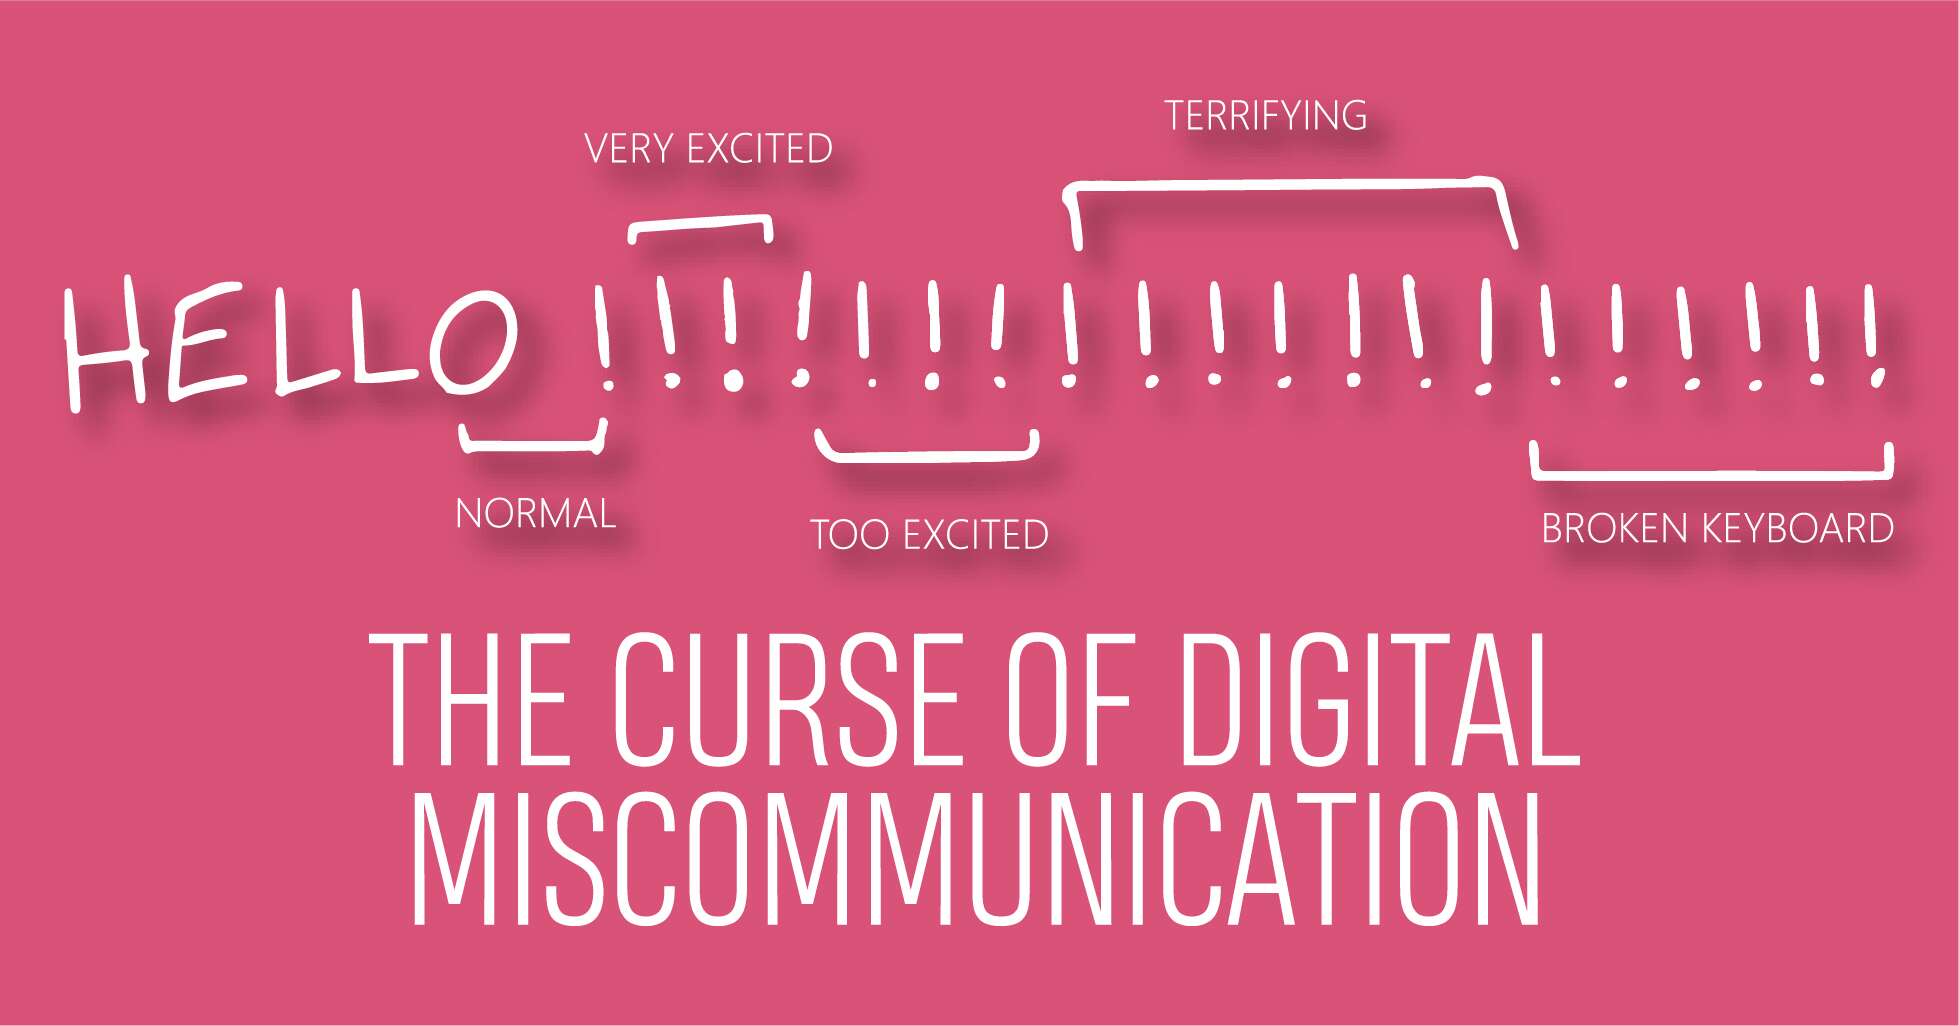 You are currently viewing THE CURSE OF DIGITAL MISCOMMUNICATION